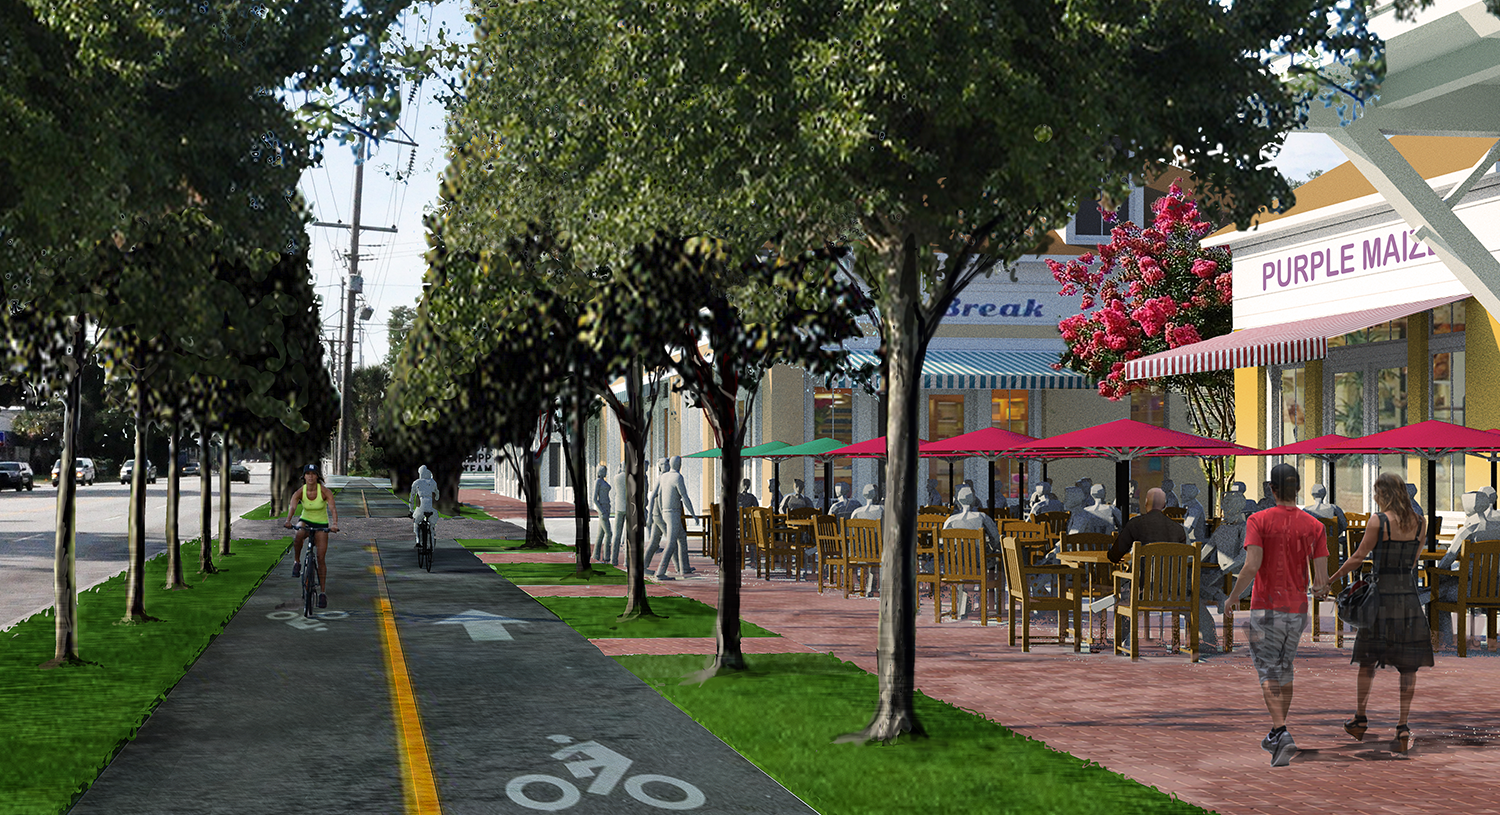 Commercial Core North - 03 - bikeway and buildings - rev 2.png